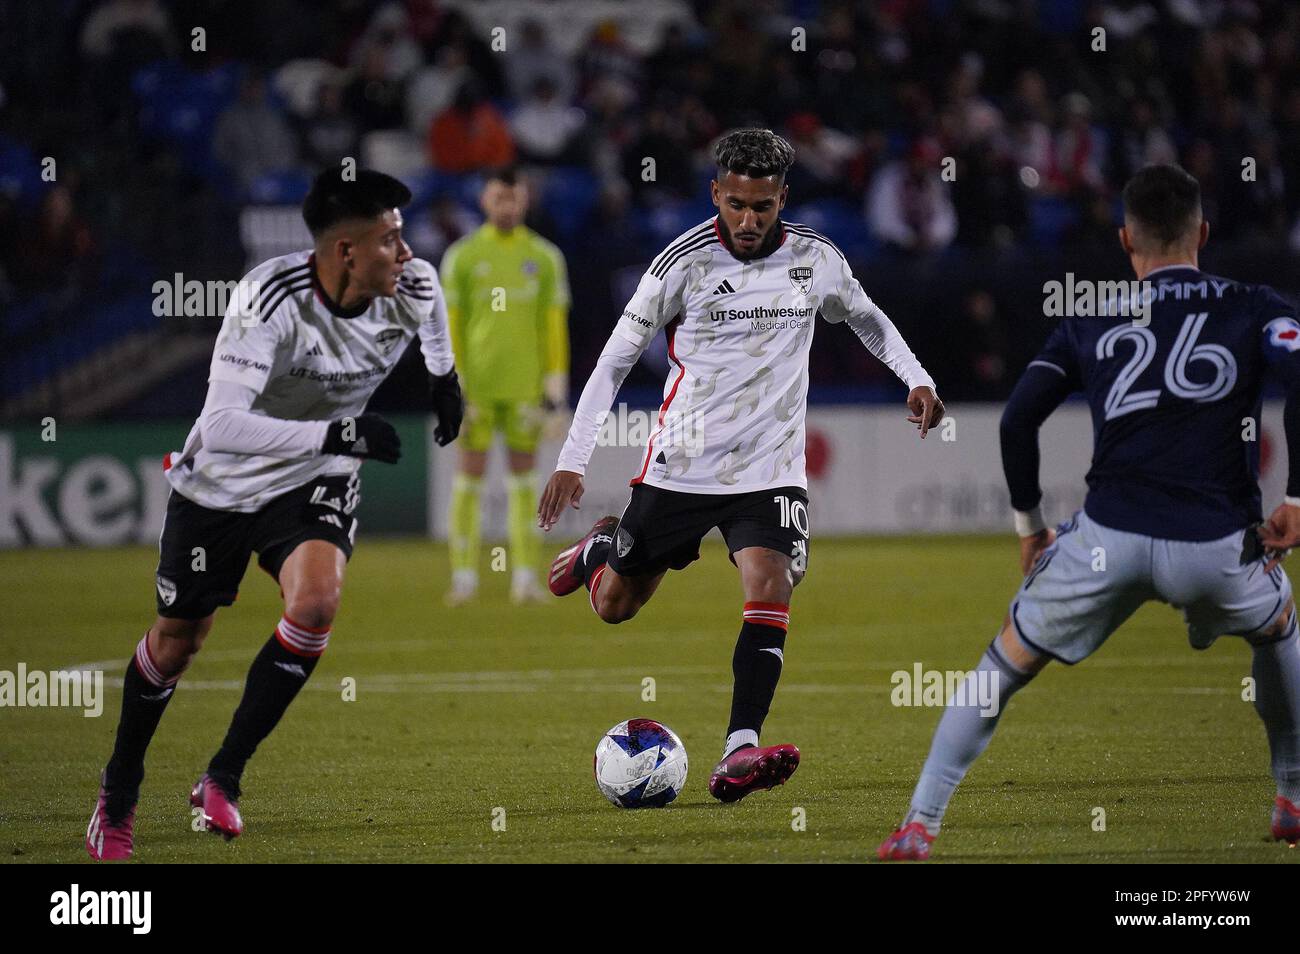 Frisco, United States. 18th Mar, 2023. March 18, 2023, Frisco, United States: FC Dallas forward Jesus Ferreira brings the ball up the field during first half action of the MLS game between FC Dallas and Sporting KC at Toyota Stadium on March 18, 2023 in Frisco, Texas. (Photo by Javier Vicencio/ Credit: Eyepix Group/Alamy Live News Stock Photo